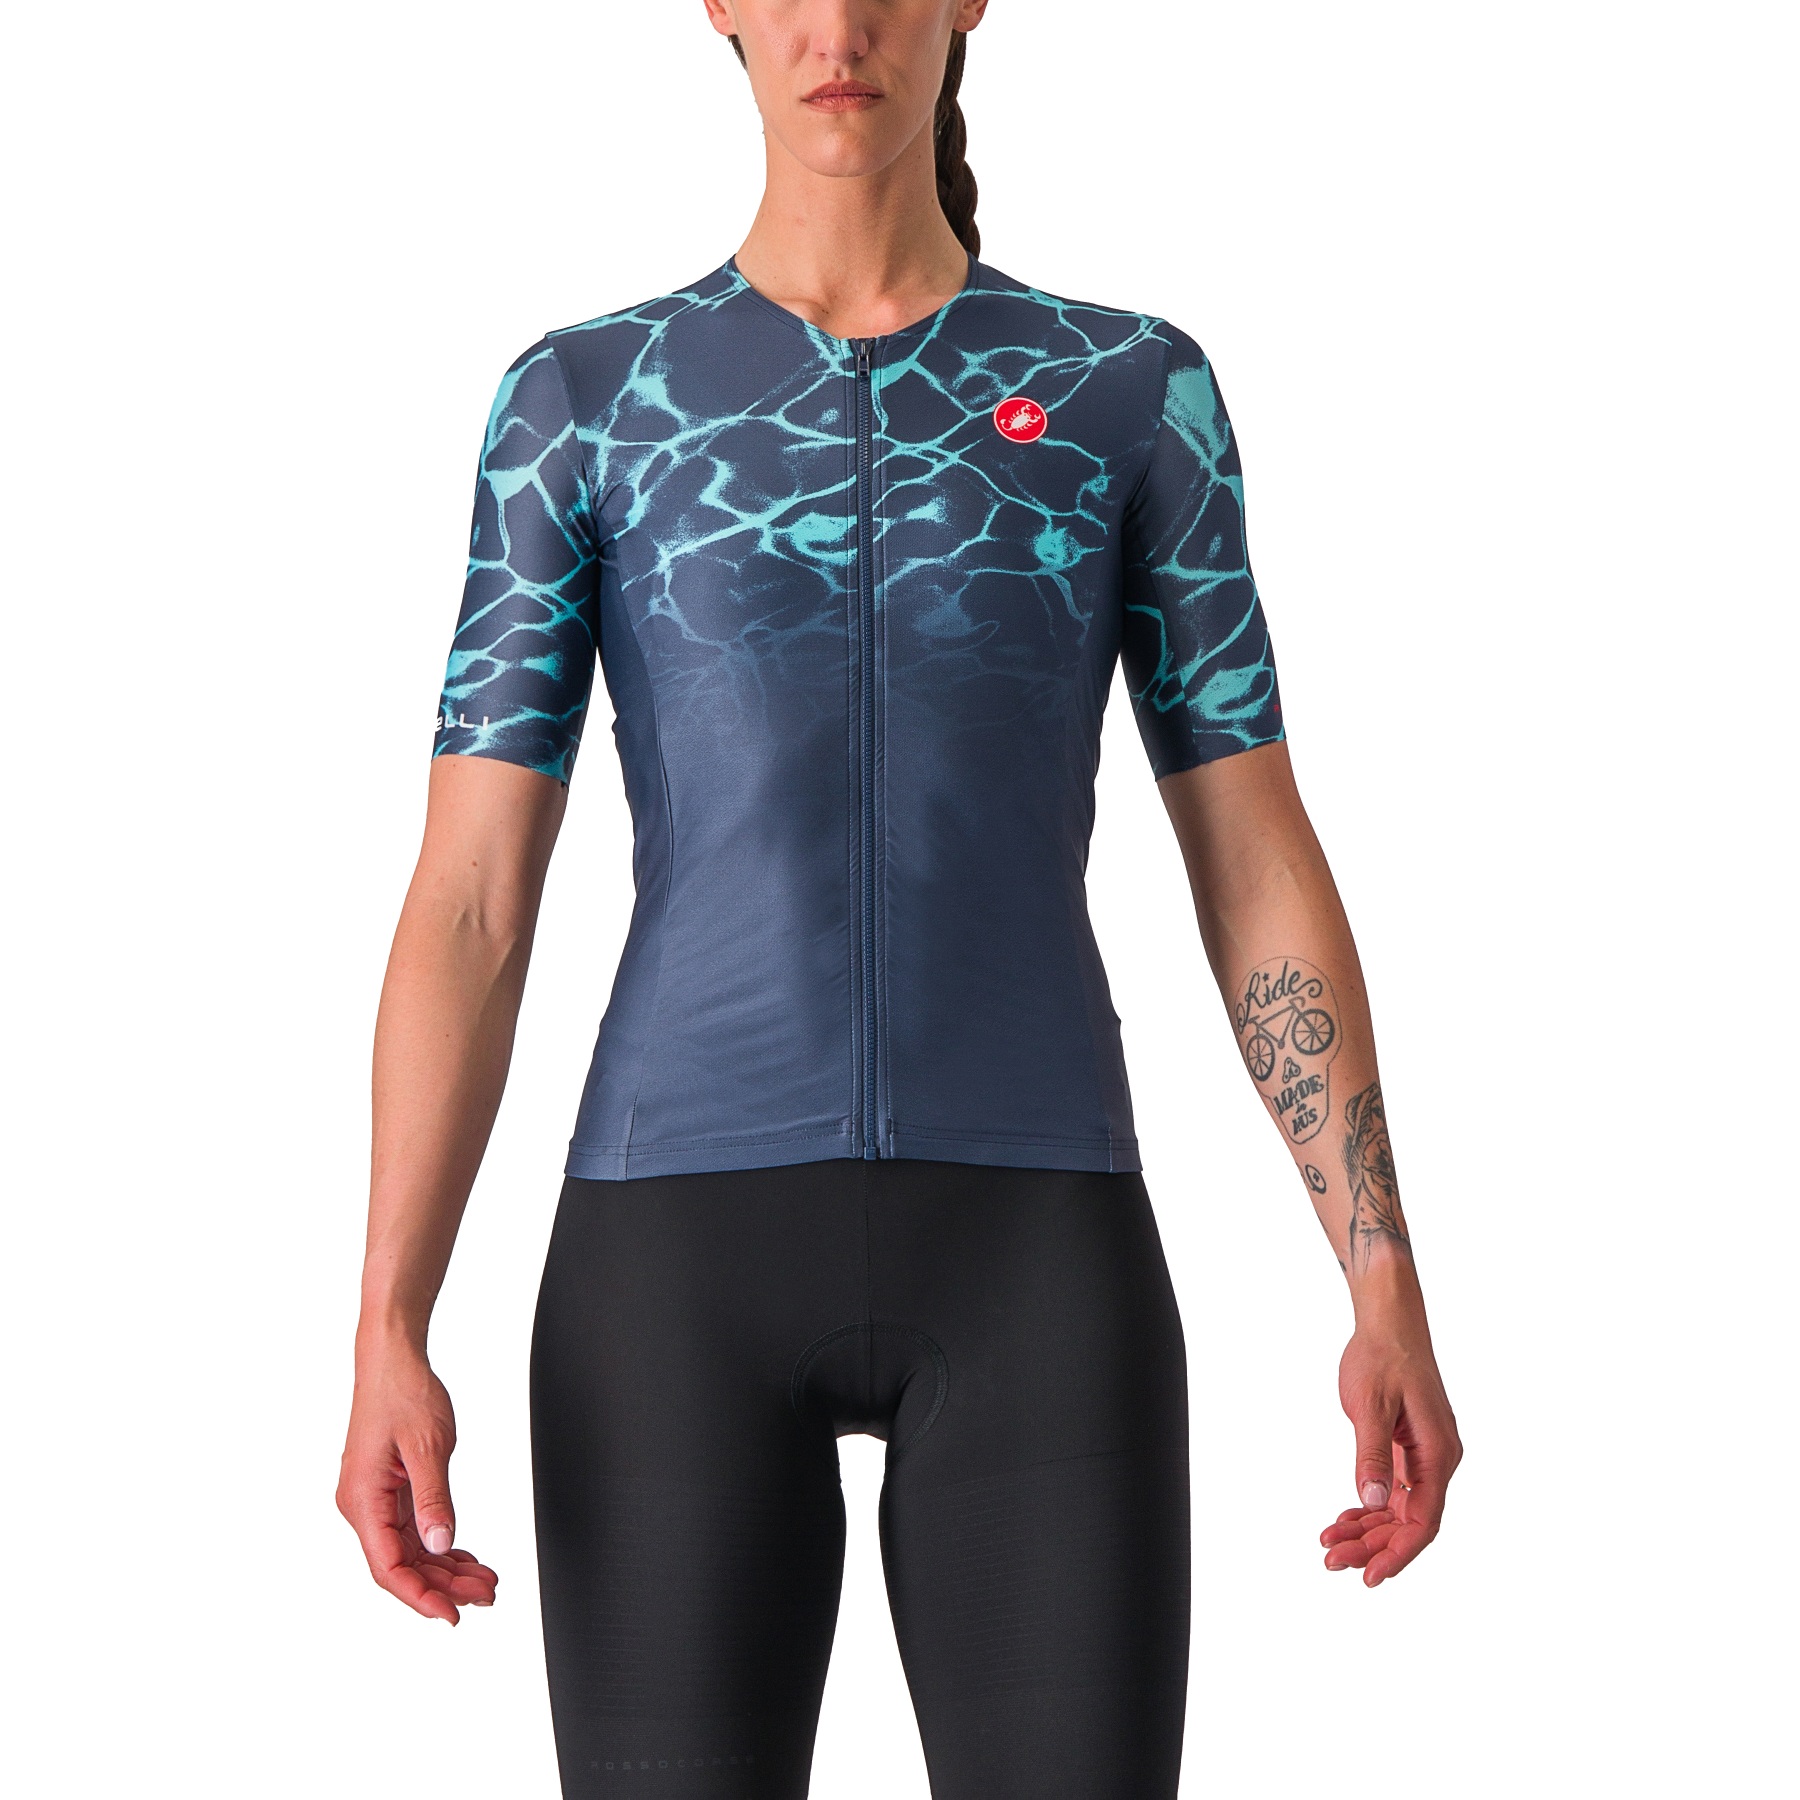 Picture of Castelli Free Speed 2 Race Top Women - belgian blue/light tourquoise 424